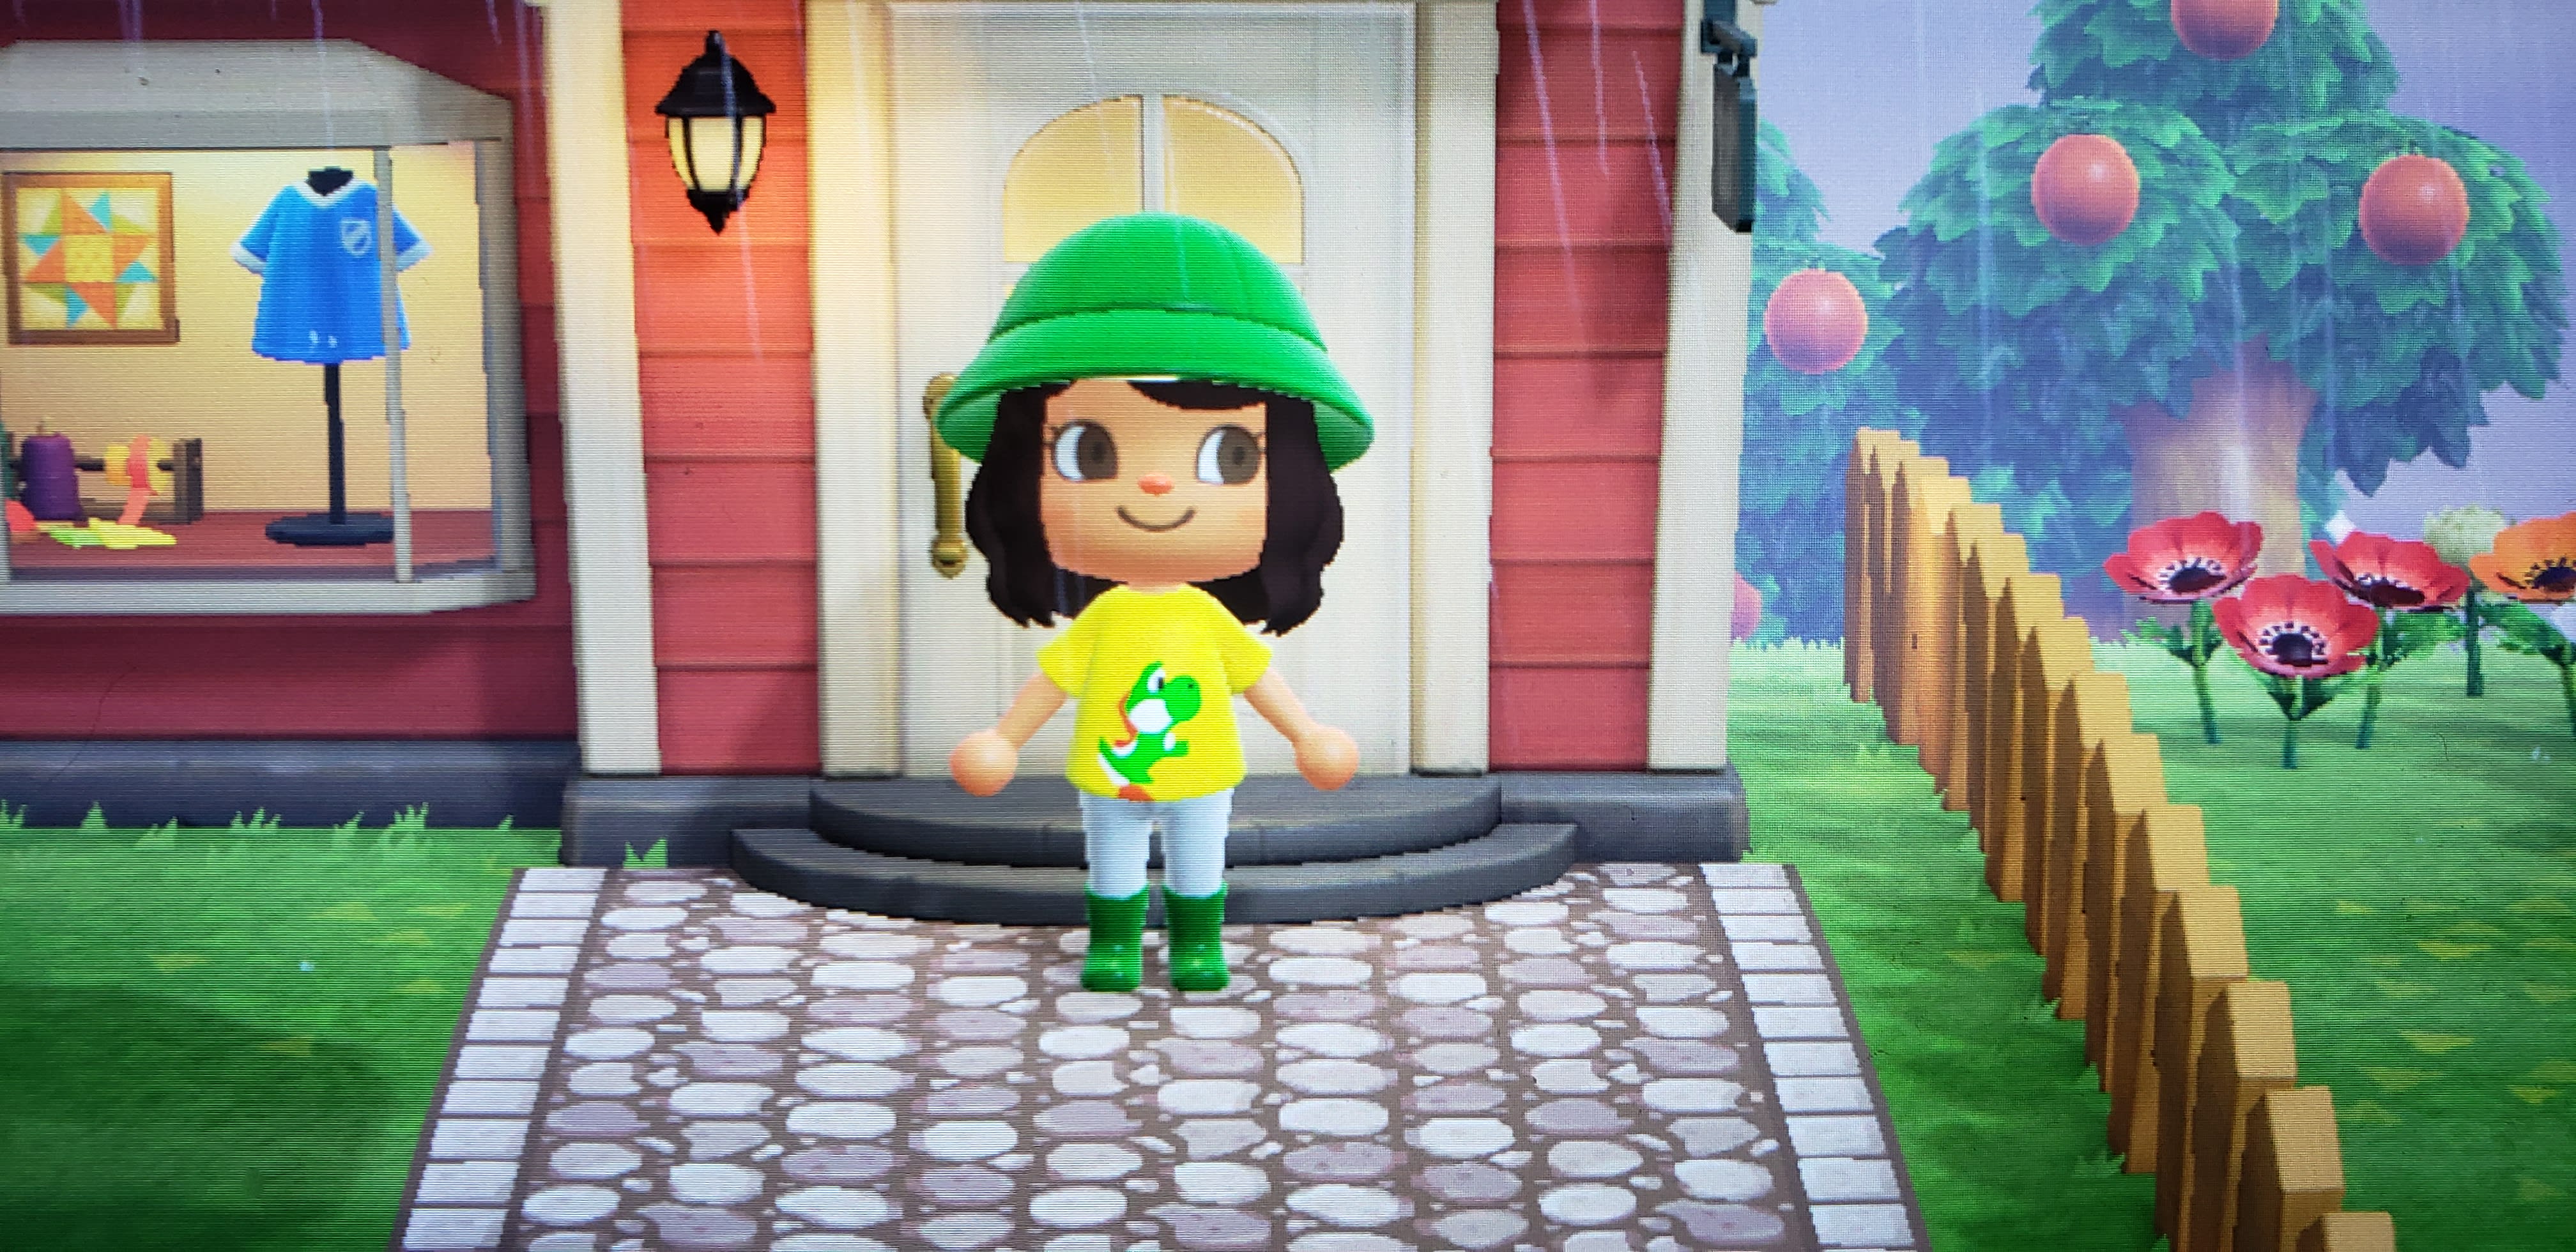 Make A Shirt Or Dress For Your Animal Crossing Villager By Soulatomic - roblox villager shirt